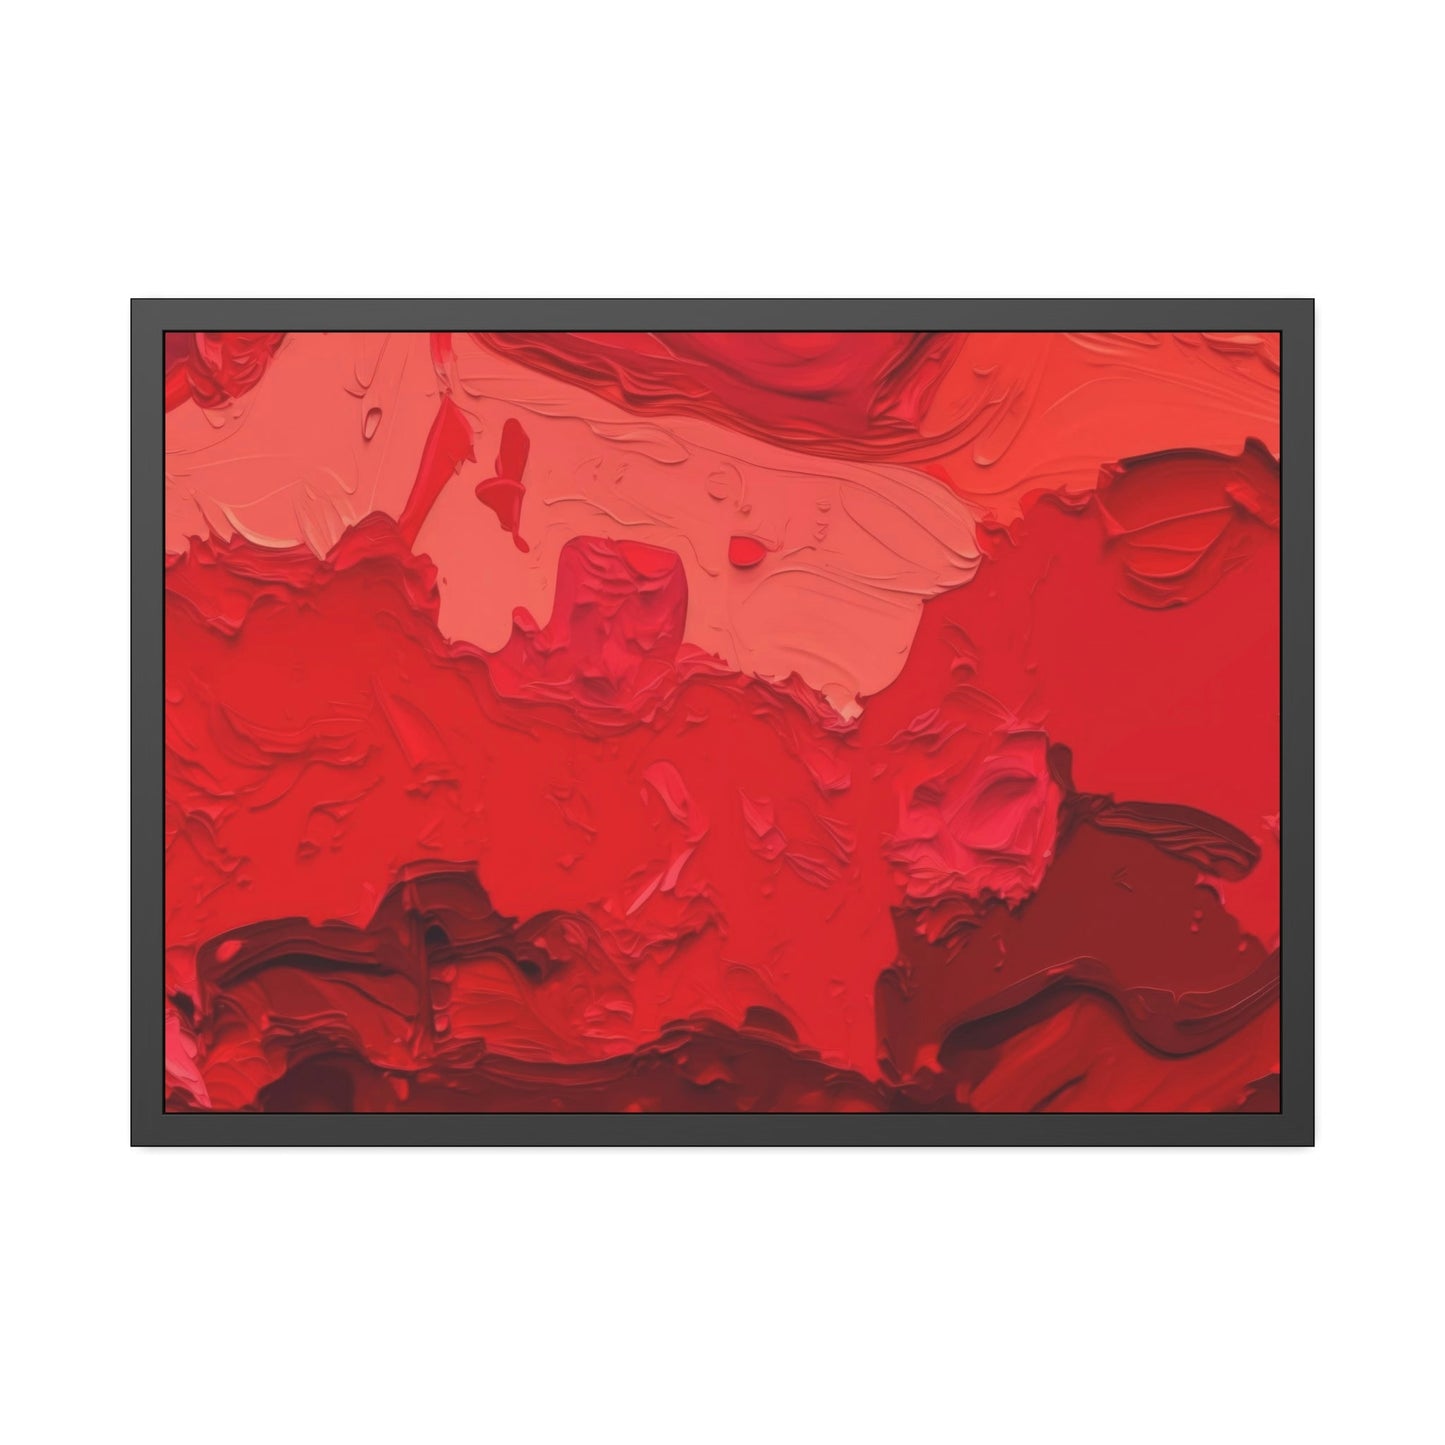 Abstract Fire: A Red Art Print on Framed Poster to Ignite Your Walls